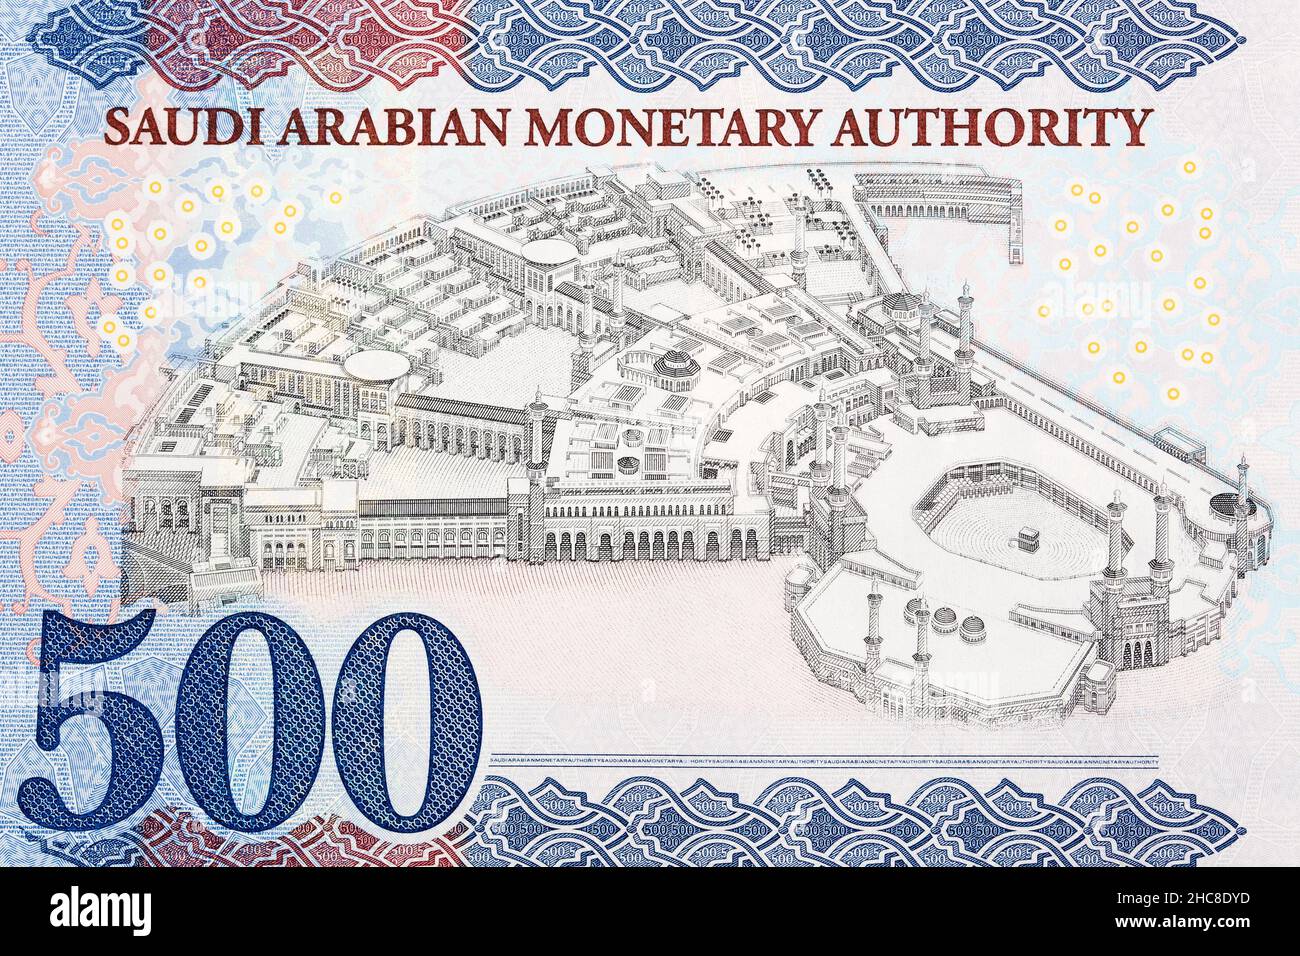 View of elaborate structure with multiple towers from Saudi Arabian money - Riyal Stock Photo